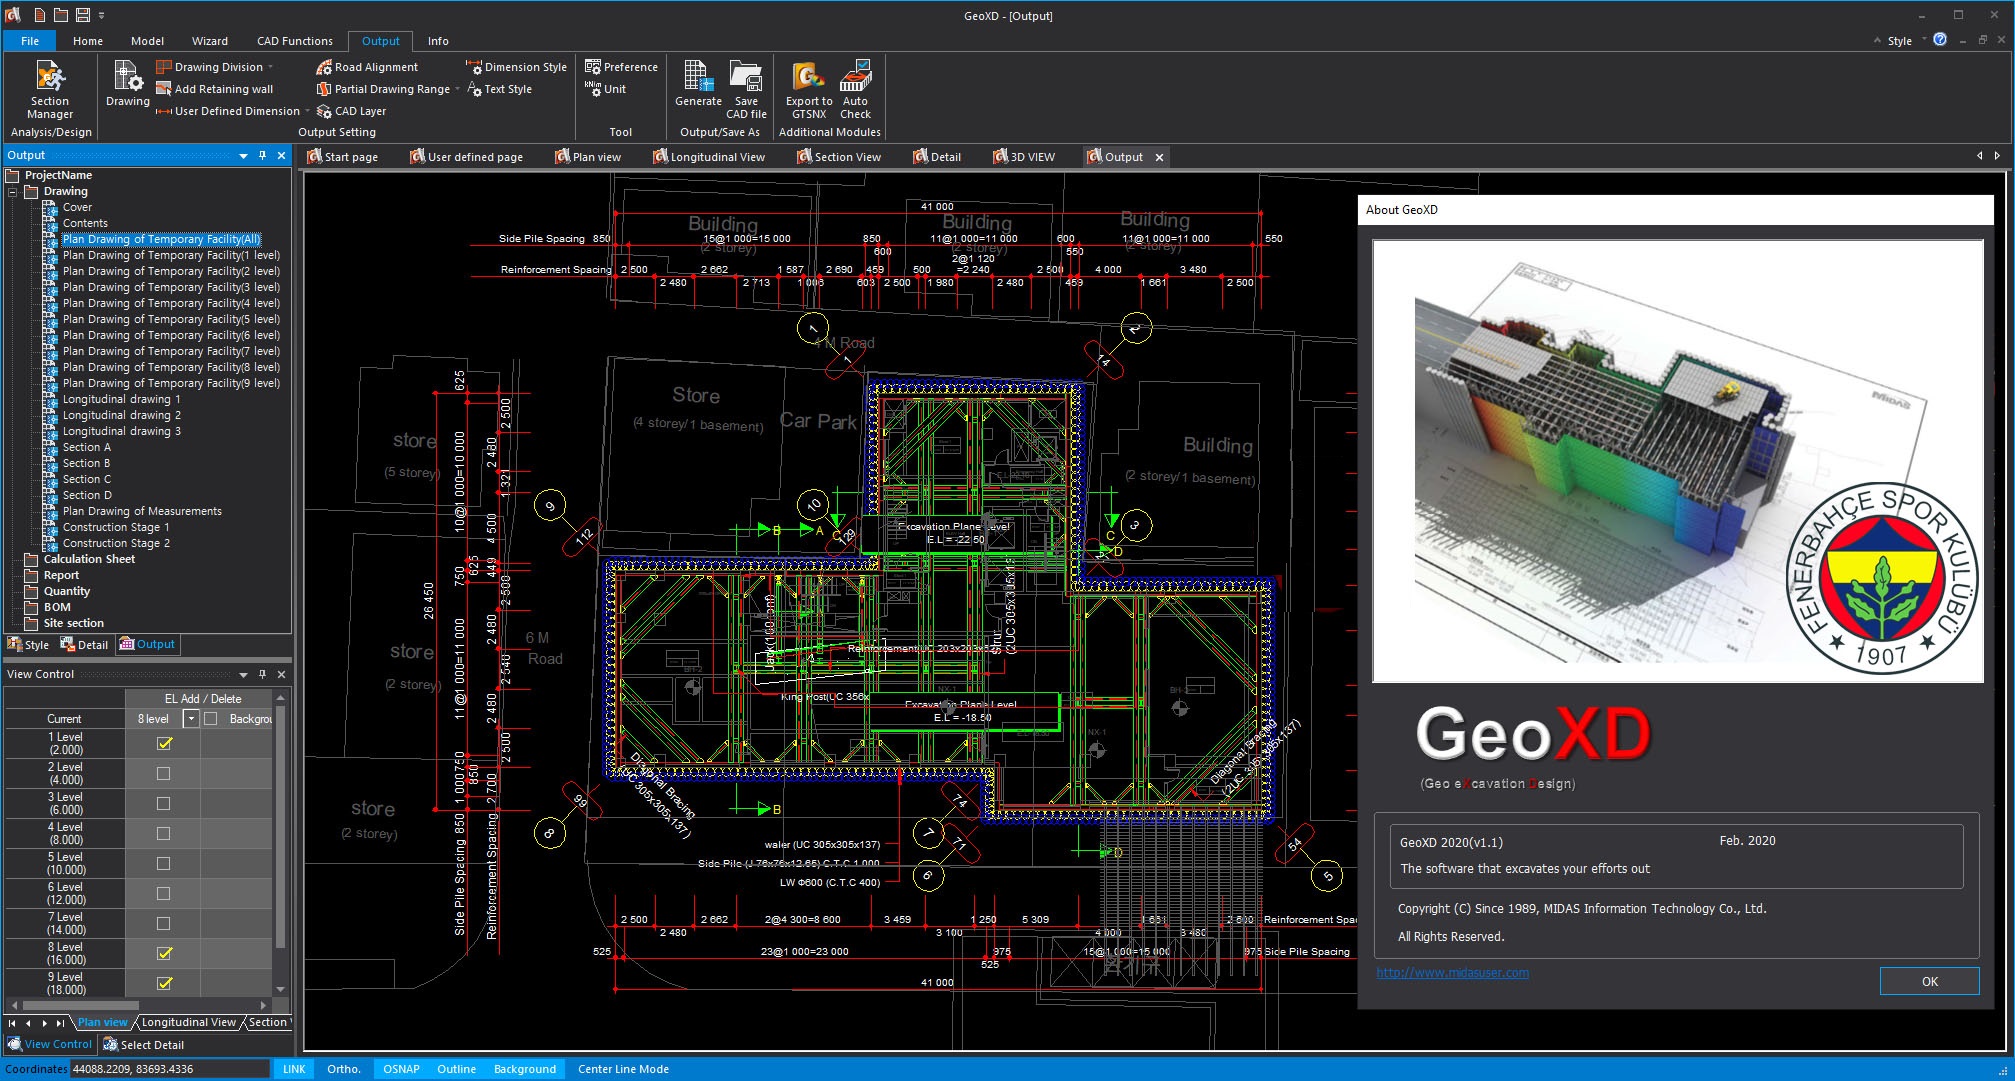 Working with MIDAS GeoXD 2020 v1.1 full